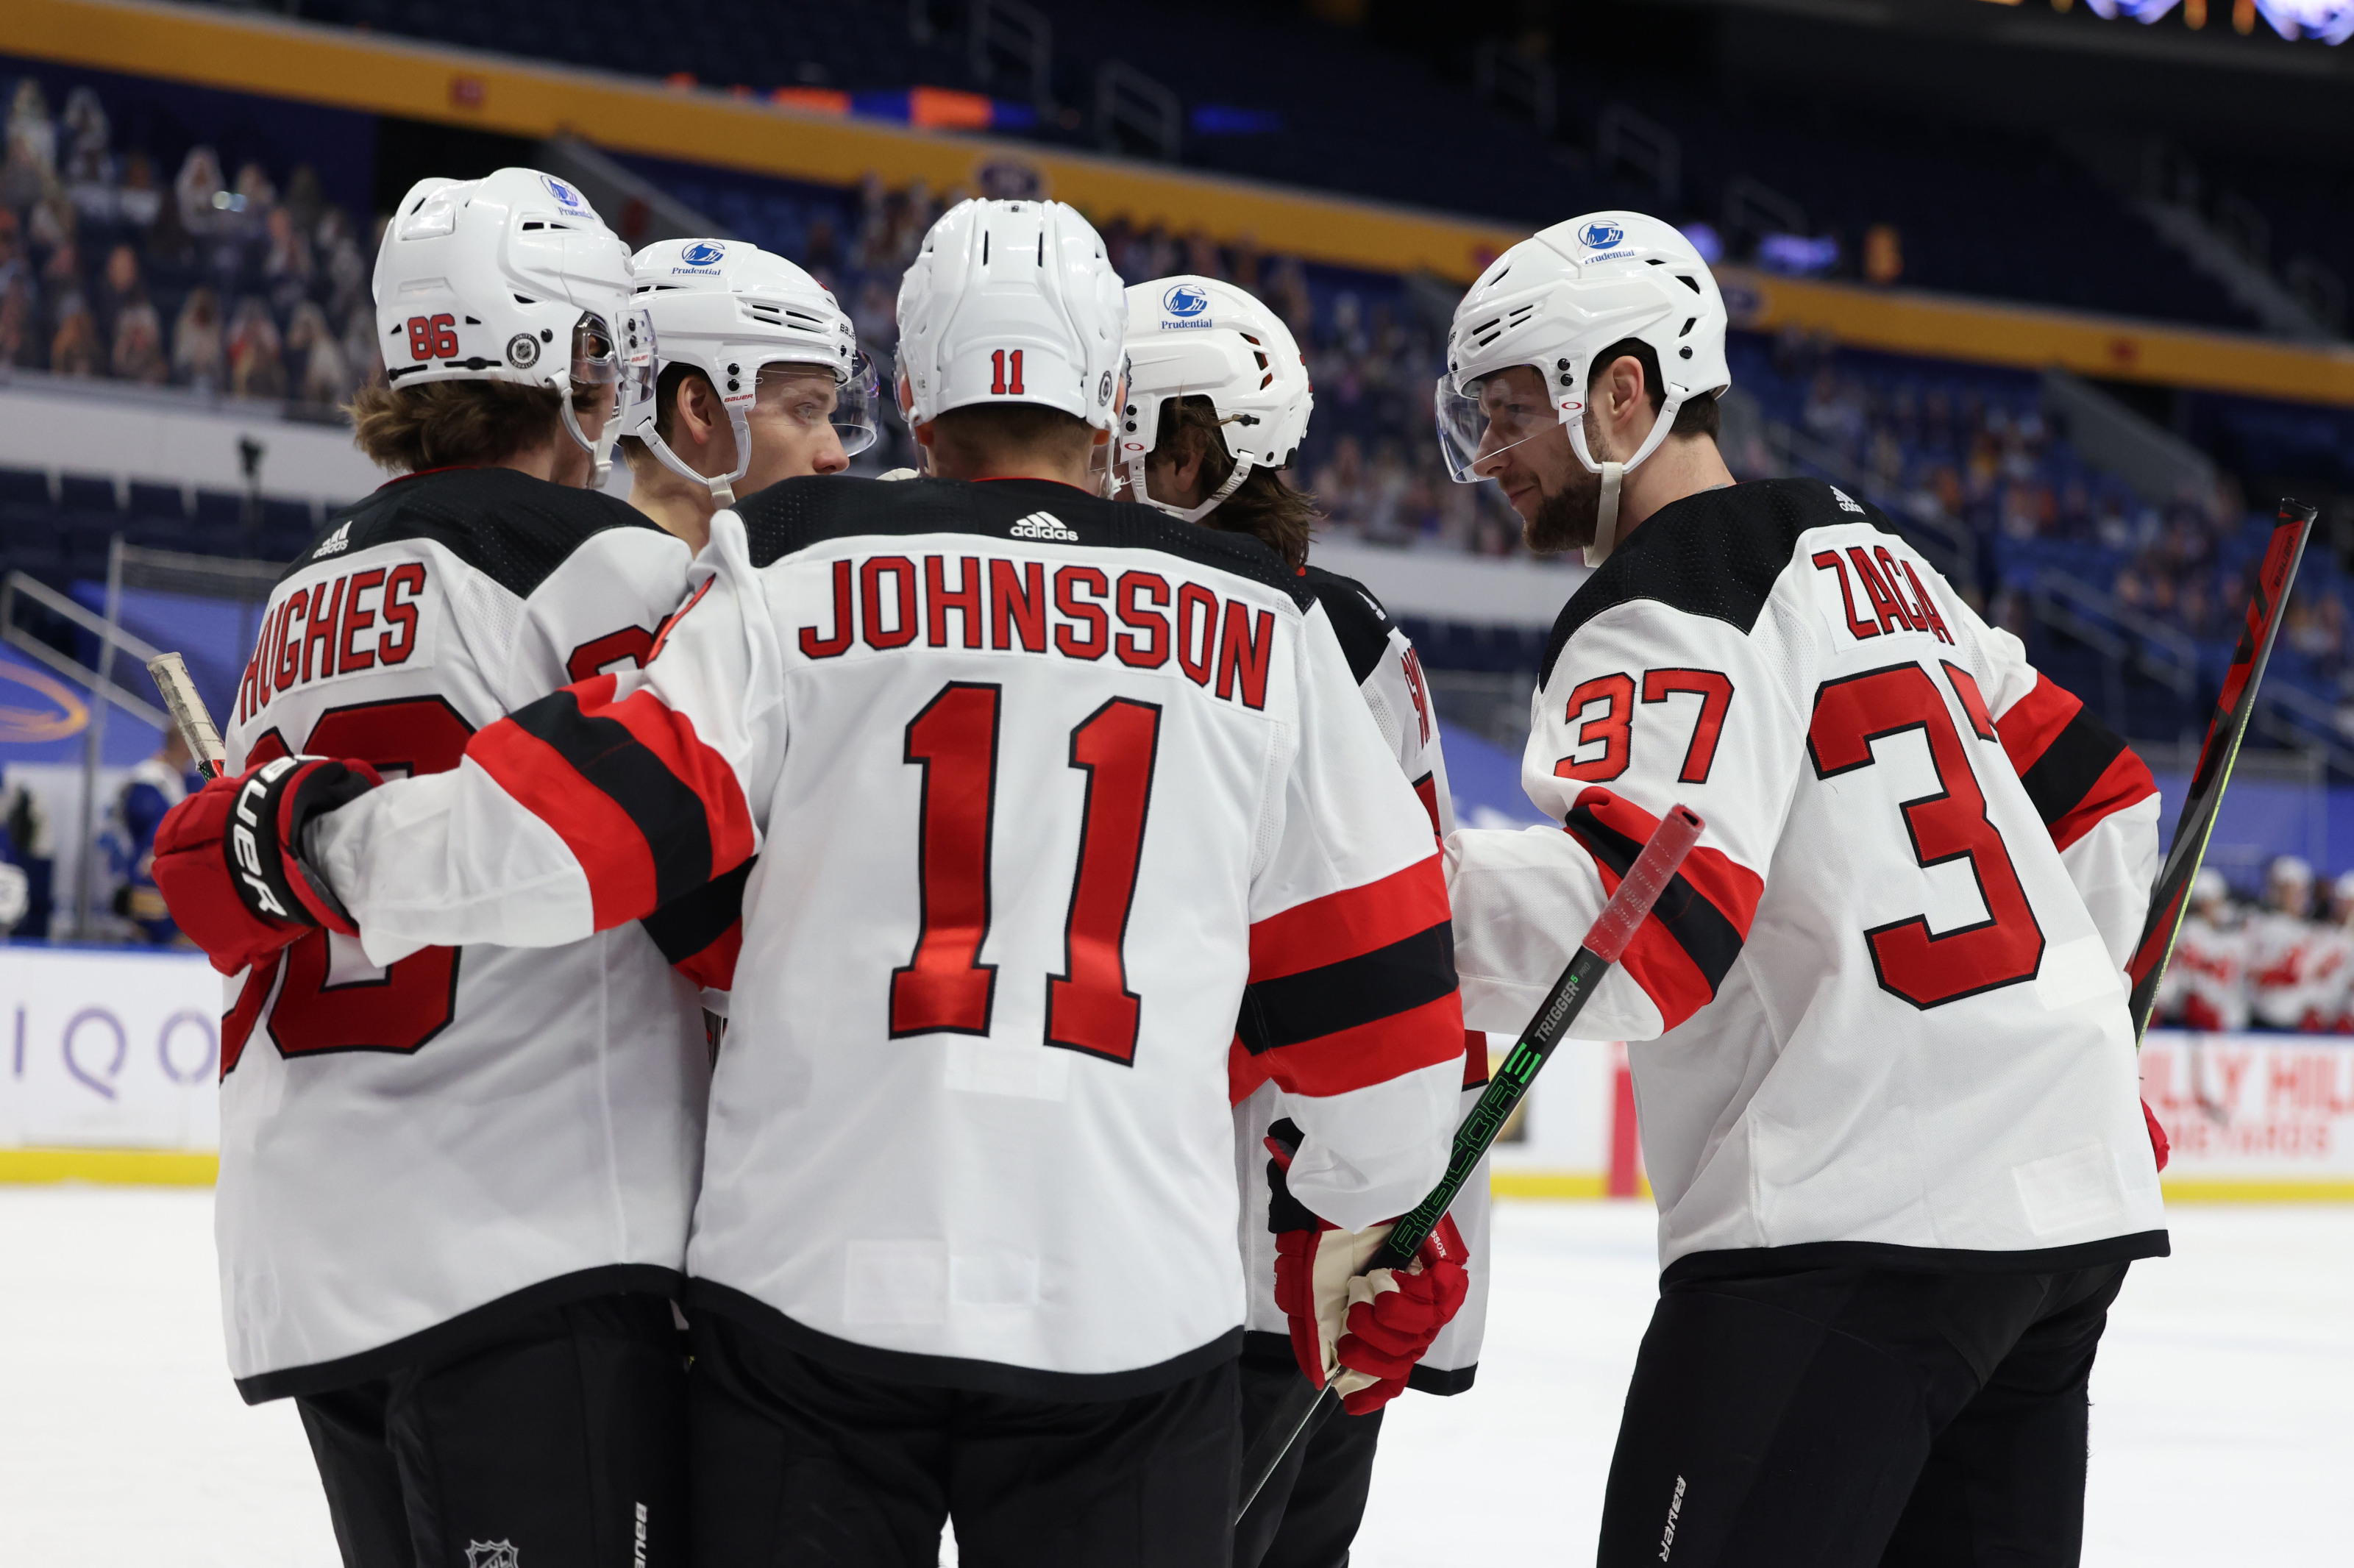 Game Preview: New Jersey Devils at Buffalo Sabres - All About The Jersey